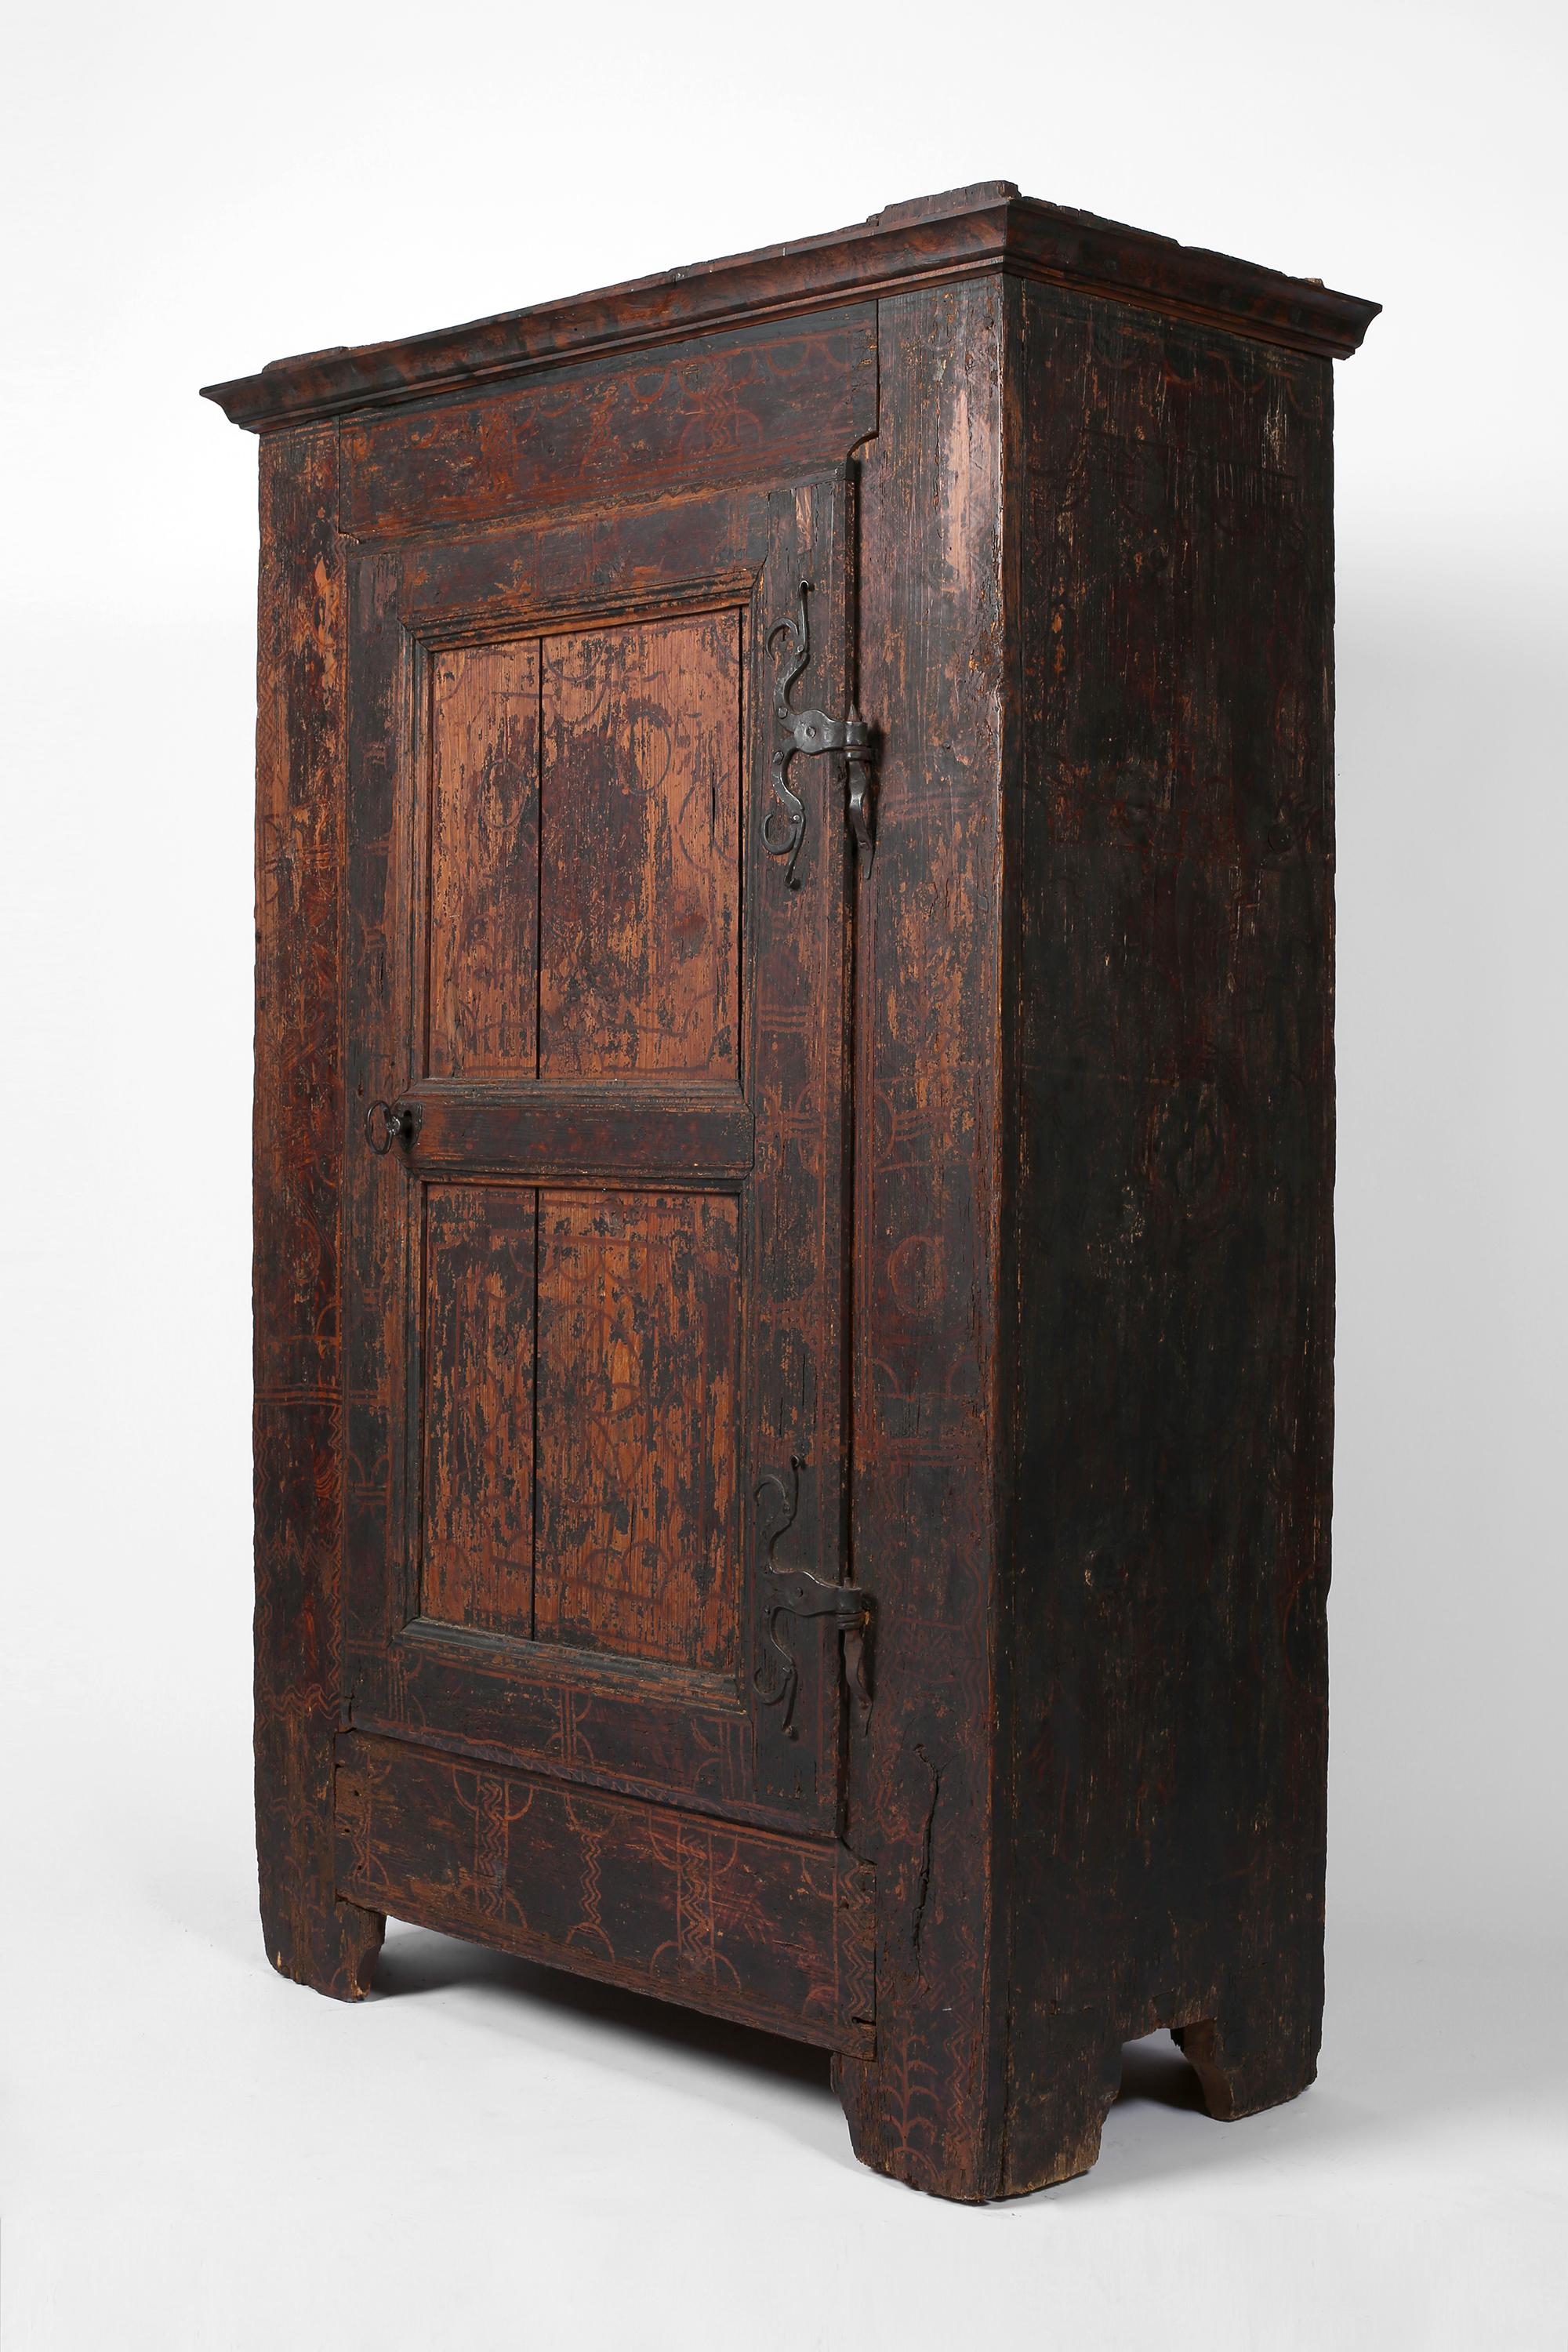 A striking, late 17th century heavily patinated pine cupboard from the alpine region of Styria. Featuring intricately forged iron hardware and remnants of historic folk paintwork, with original working lock and key. The panelled door opens to reveal